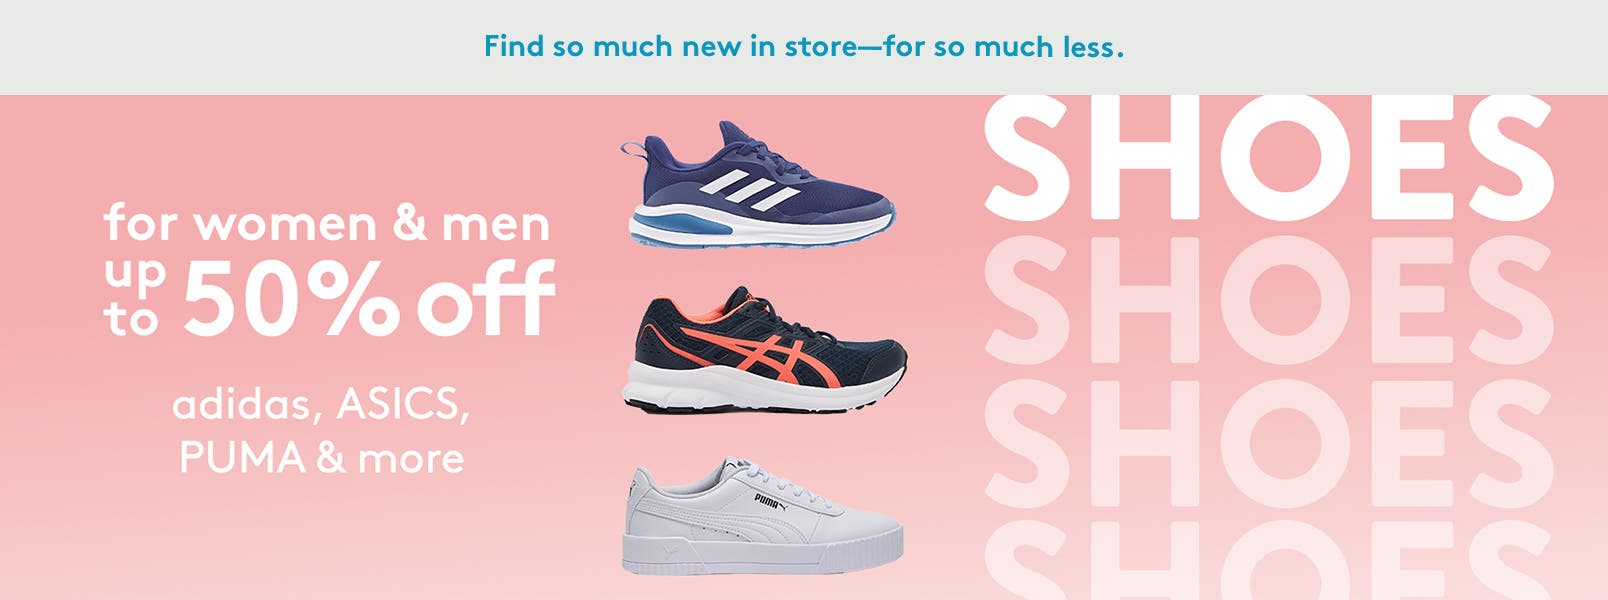 Find so much new is store for so much less. Shoes for women and men, up to fifty percent off. By Adidas, ASICS, PUMA and more.